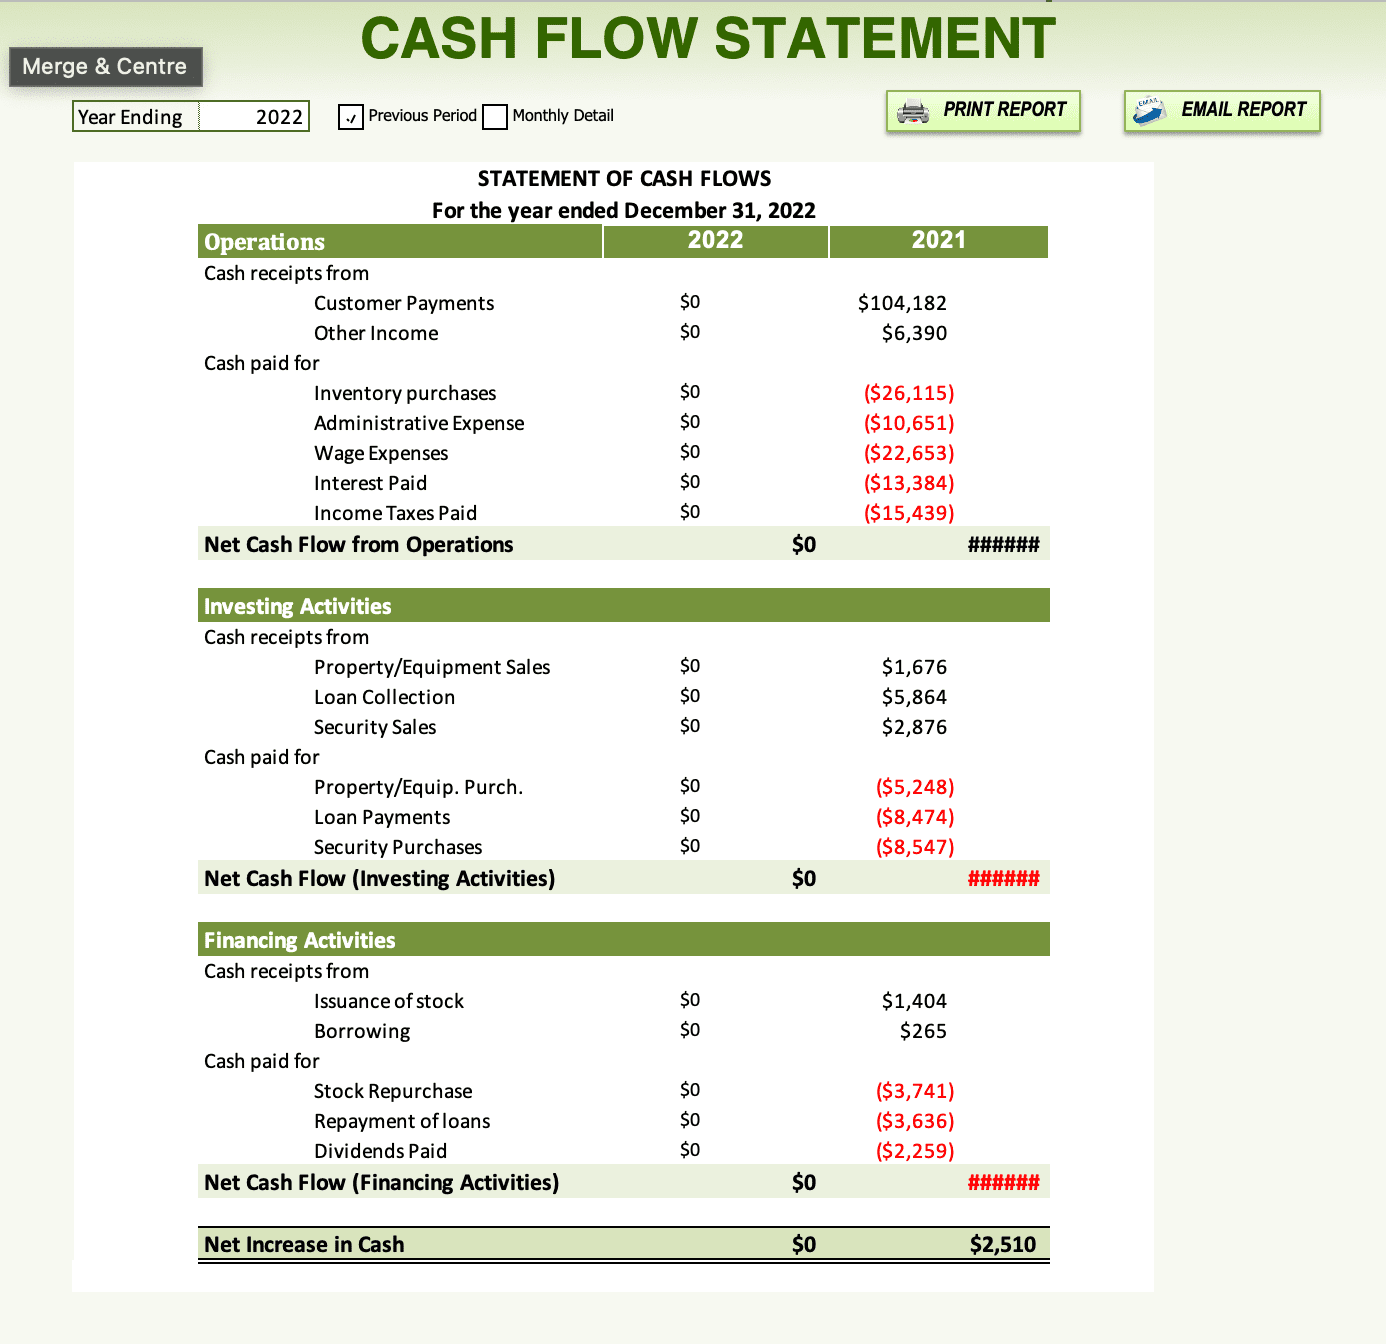 Cash Flow Manager - XLDB Spreadsheet Solutions